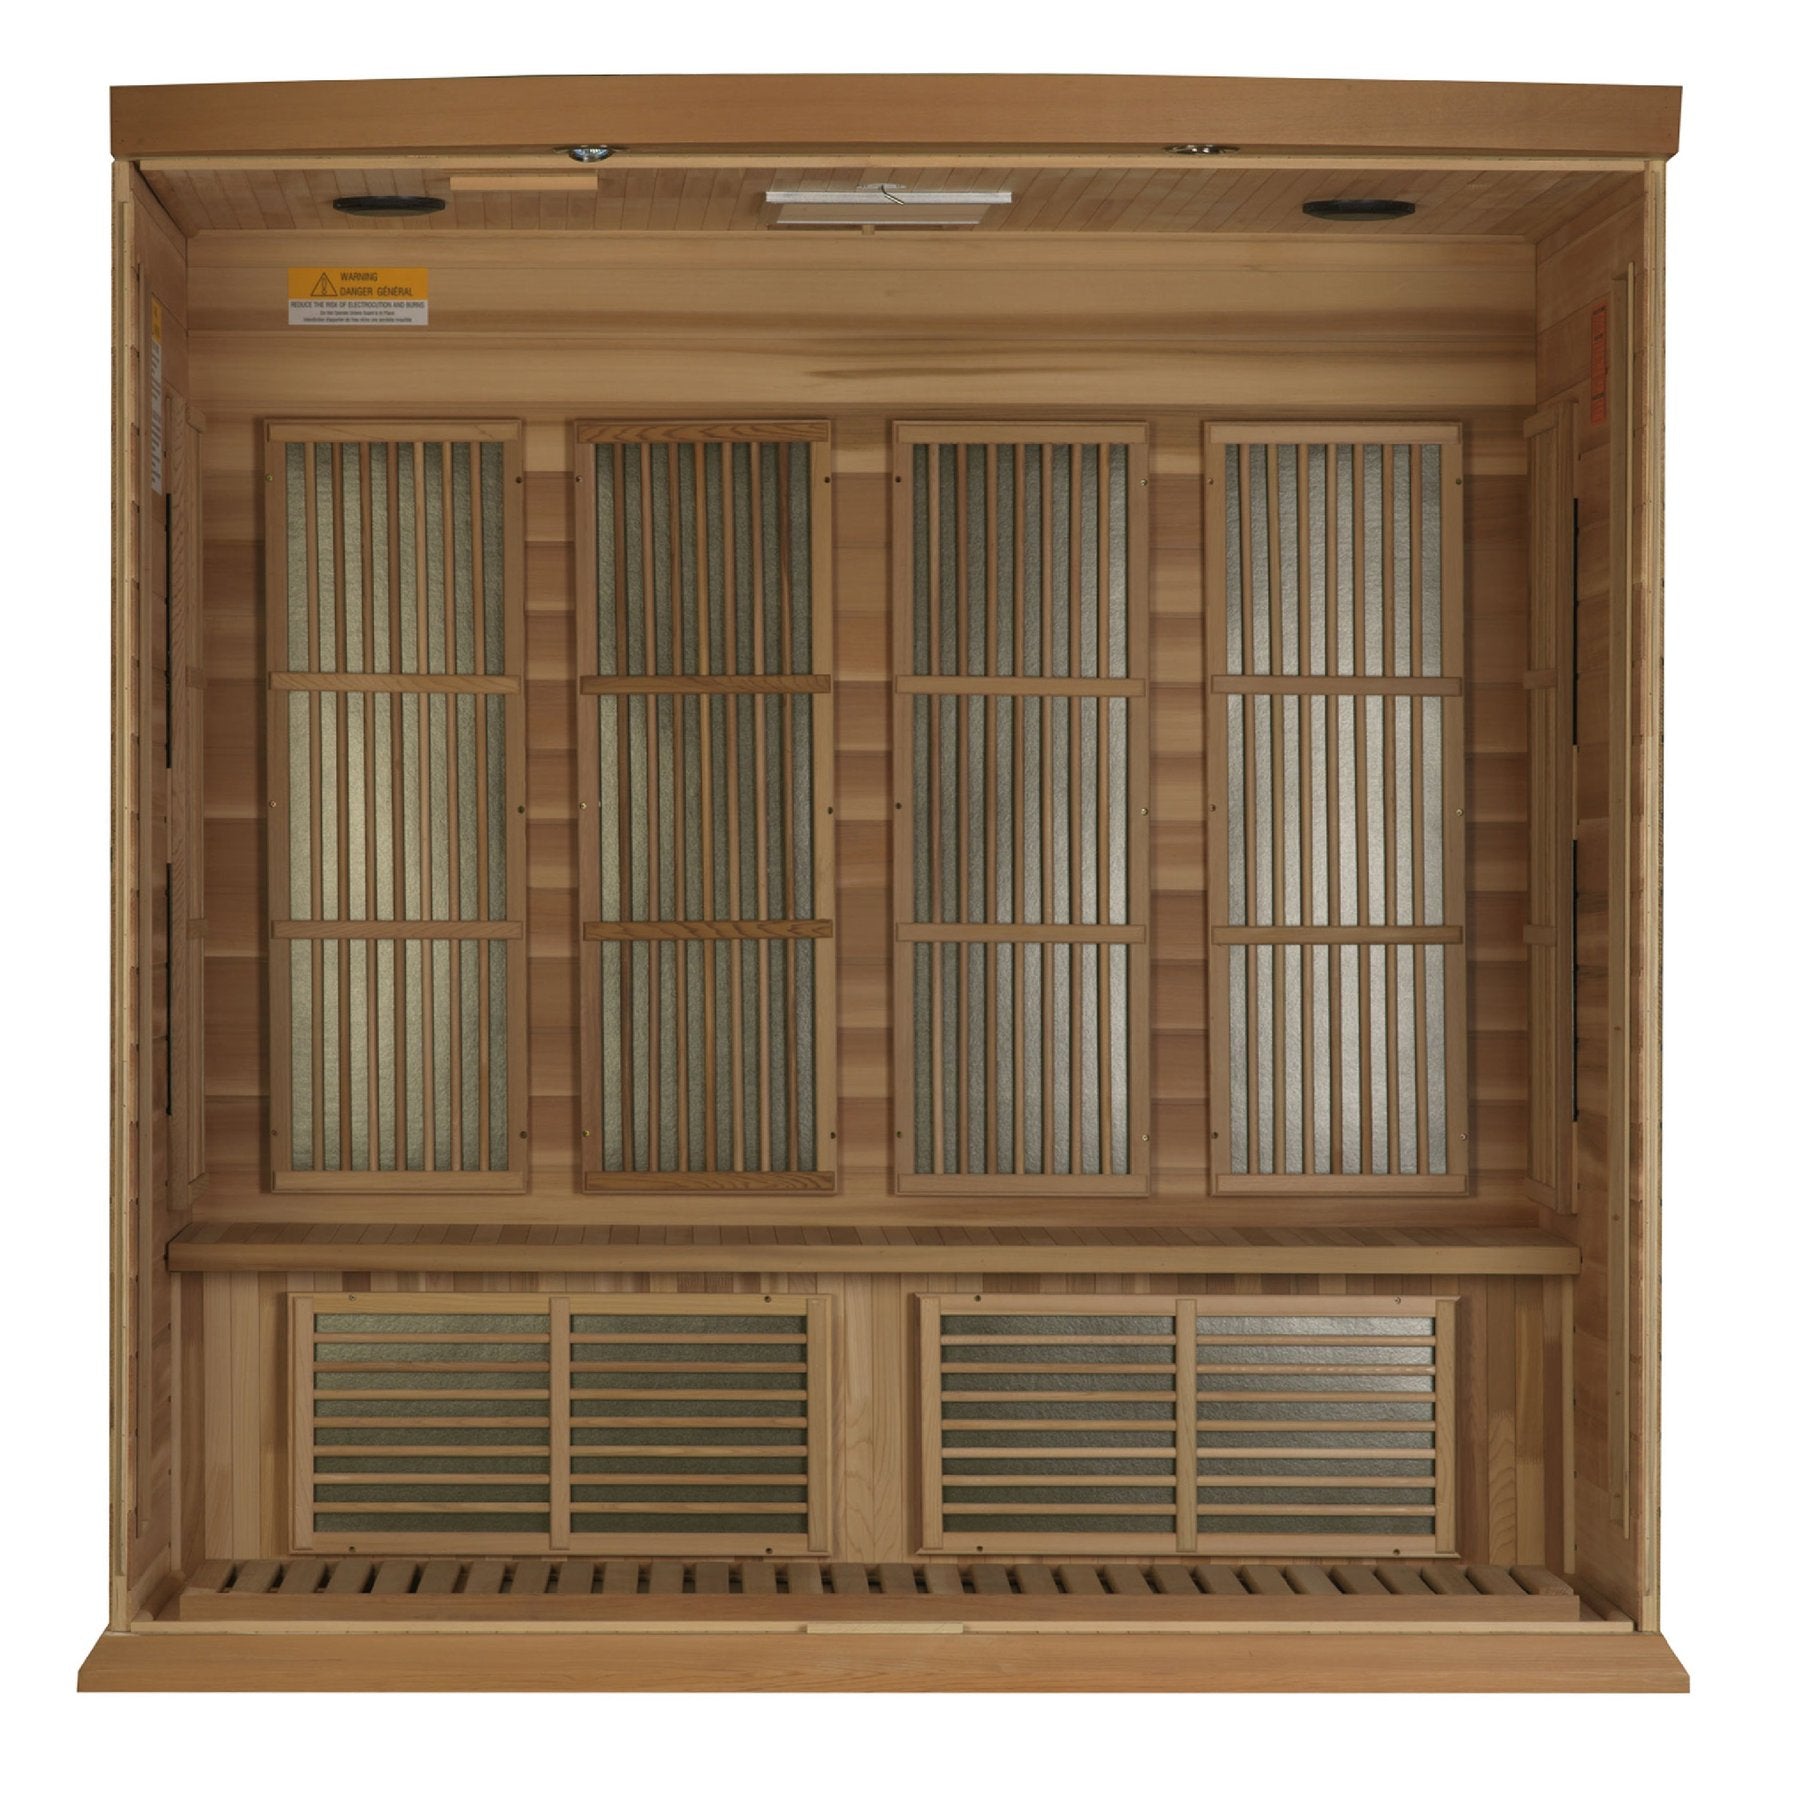 Maxxus 4 Person Low EMF Infrared Sauna (Canadian Red Cedar) - Promo code "75off" for $75 Discount / Ships in 2 Days